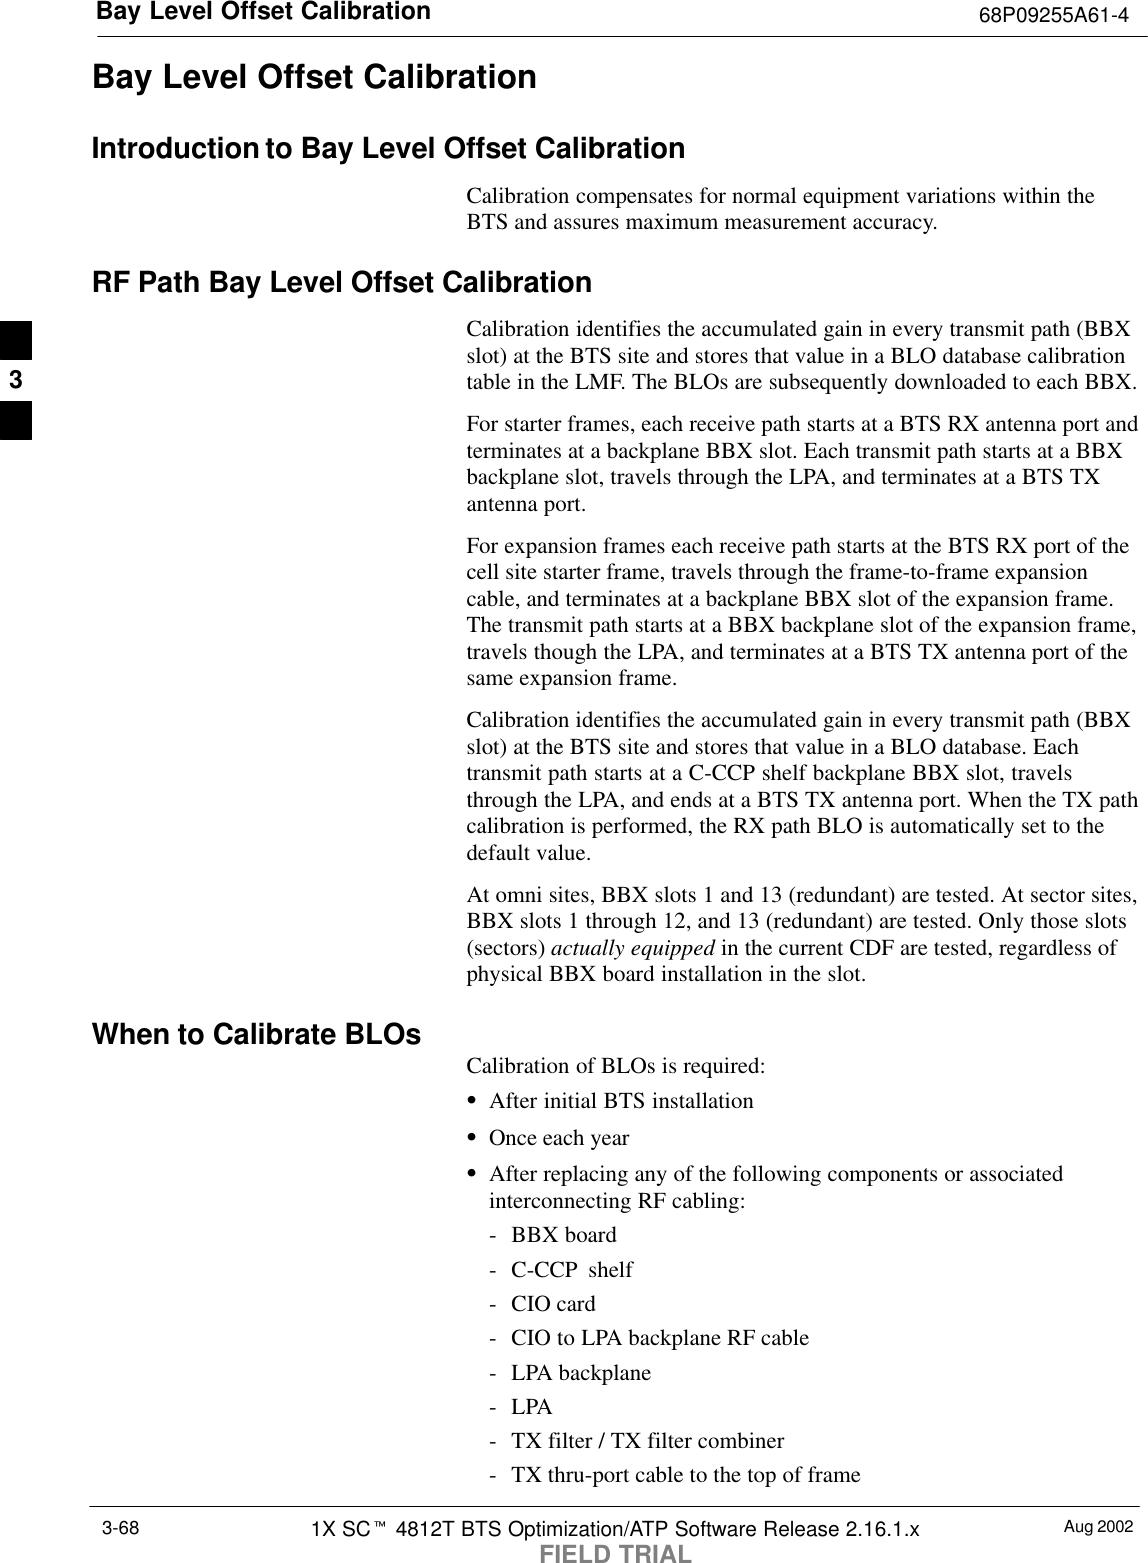 Bay Level Offset Calibration 68P09255A61-4Aug 20021X SCt 4812T BTS Optimization/ATP Software Release 2.16.1.xFIELD TRIAL3-68Bay Level Offset CalibrationIntroduction to Bay Level Offset CalibrationCalibration compensates for normal equipment variations within theBTS and assures maximum measurement accuracy.RF Path Bay Level Offset CalibrationCalibration identifies the accumulated gain in every transmit path (BBXslot) at the BTS site and stores that value in a BLO database calibrationtable in the LMF. The BLOs are subsequently downloaded to each BBX.For starter frames, each receive path starts at a BTS RX antenna port andterminates at a backplane BBX slot. Each transmit path starts at a BBXbackplane slot, travels through the LPA, and terminates at a BTS TXantenna port.For expansion frames each receive path starts at the BTS RX port of thecell site starter frame, travels through the frame-to-frame expansioncable, and terminates at a backplane BBX slot of the expansion frame.The transmit path starts at a BBX backplane slot of the expansion frame,travels though the LPA, and terminates at a BTS TX antenna port of thesame expansion frame.Calibration identifies the accumulated gain in every transmit path (BBXslot) at the BTS site and stores that value in a BLO database. Eachtransmit path starts at a C-CCP shelf backplane BBX slot, travelsthrough the LPA, and ends at a BTS TX antenna port. When the TX pathcalibration is performed, the RX path BLO is automatically set to thedefault value.At omni sites, BBX slots 1 and 13 (redundant) are tested. At sector sites,BBX slots 1 through 12, and 13 (redundant) are tested. Only those slots(sectors) actually equipped in the current CDF are tested, regardless ofphysical BBX board installation in the slot.When to Calibrate BLOs Calibration of BLOs is required:SAfter initial BTS installationSOnce each yearSAfter replacing any of the following components or associatedinterconnecting RF cabling:- BBX board- C-CCP shelf- CIO card- CIO to LPA backplane RF cable- LPA backplane-LPA- TX filter / TX filter combiner- TX thru-port cable to the top of frame3